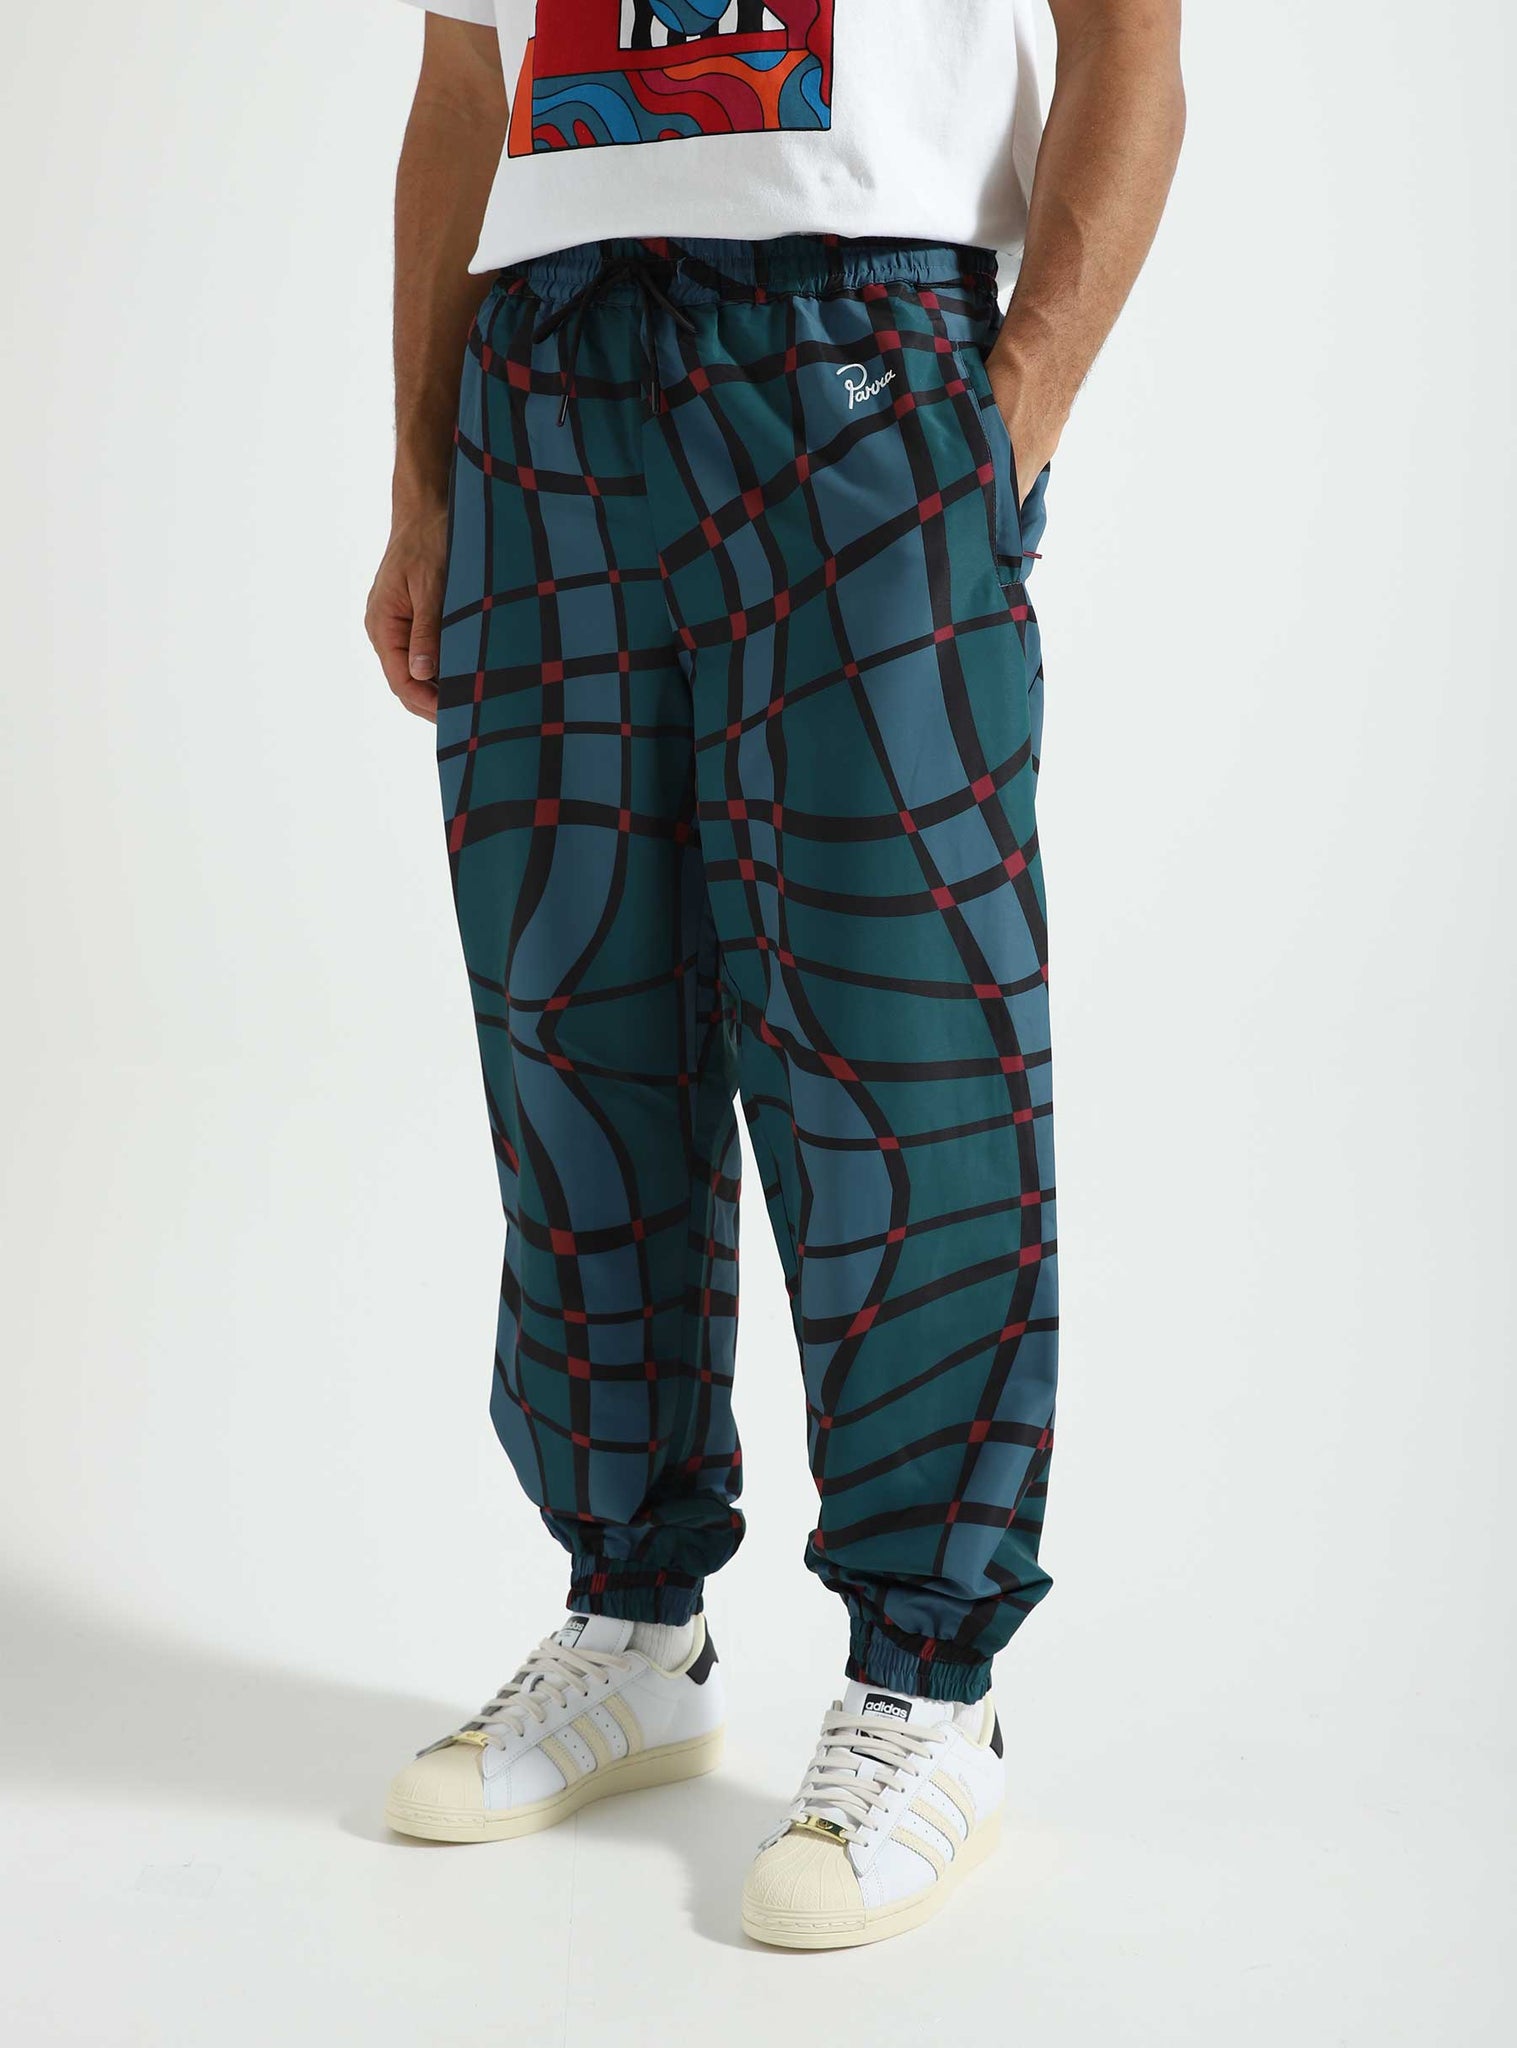 Squared waves pattern track pants (Multi Check)